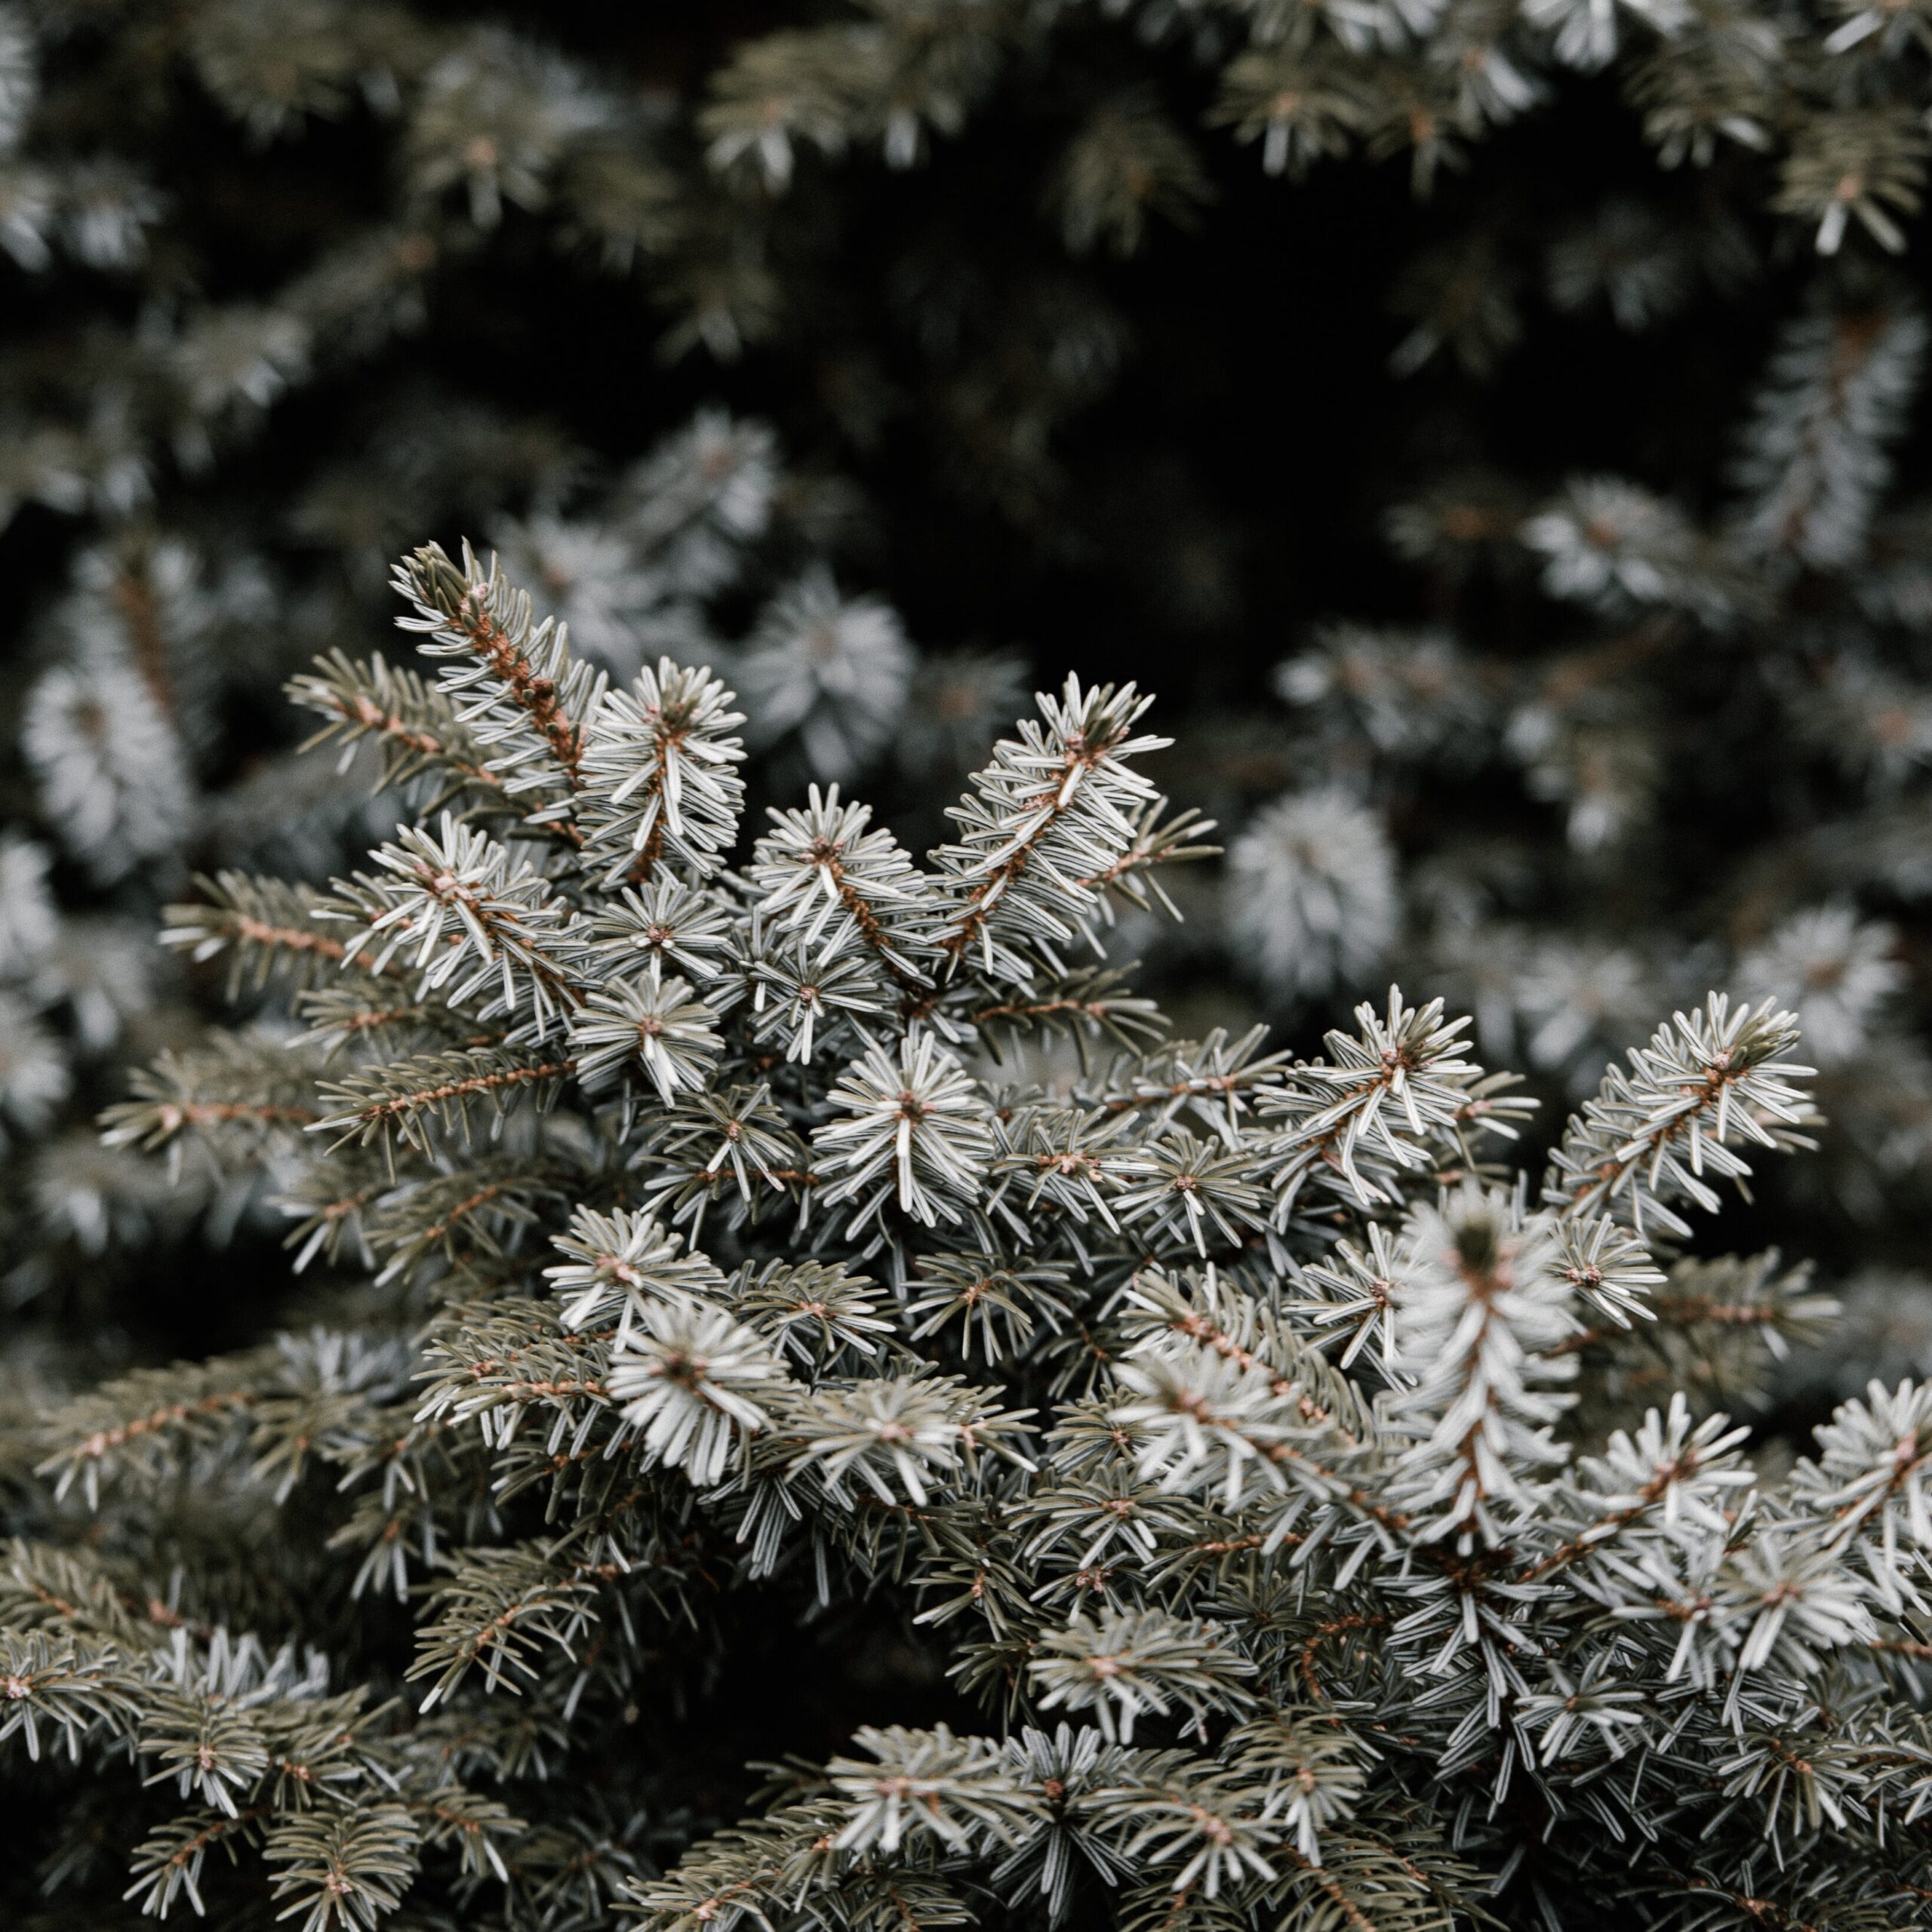 evergreen tree in winter needles covered in snow